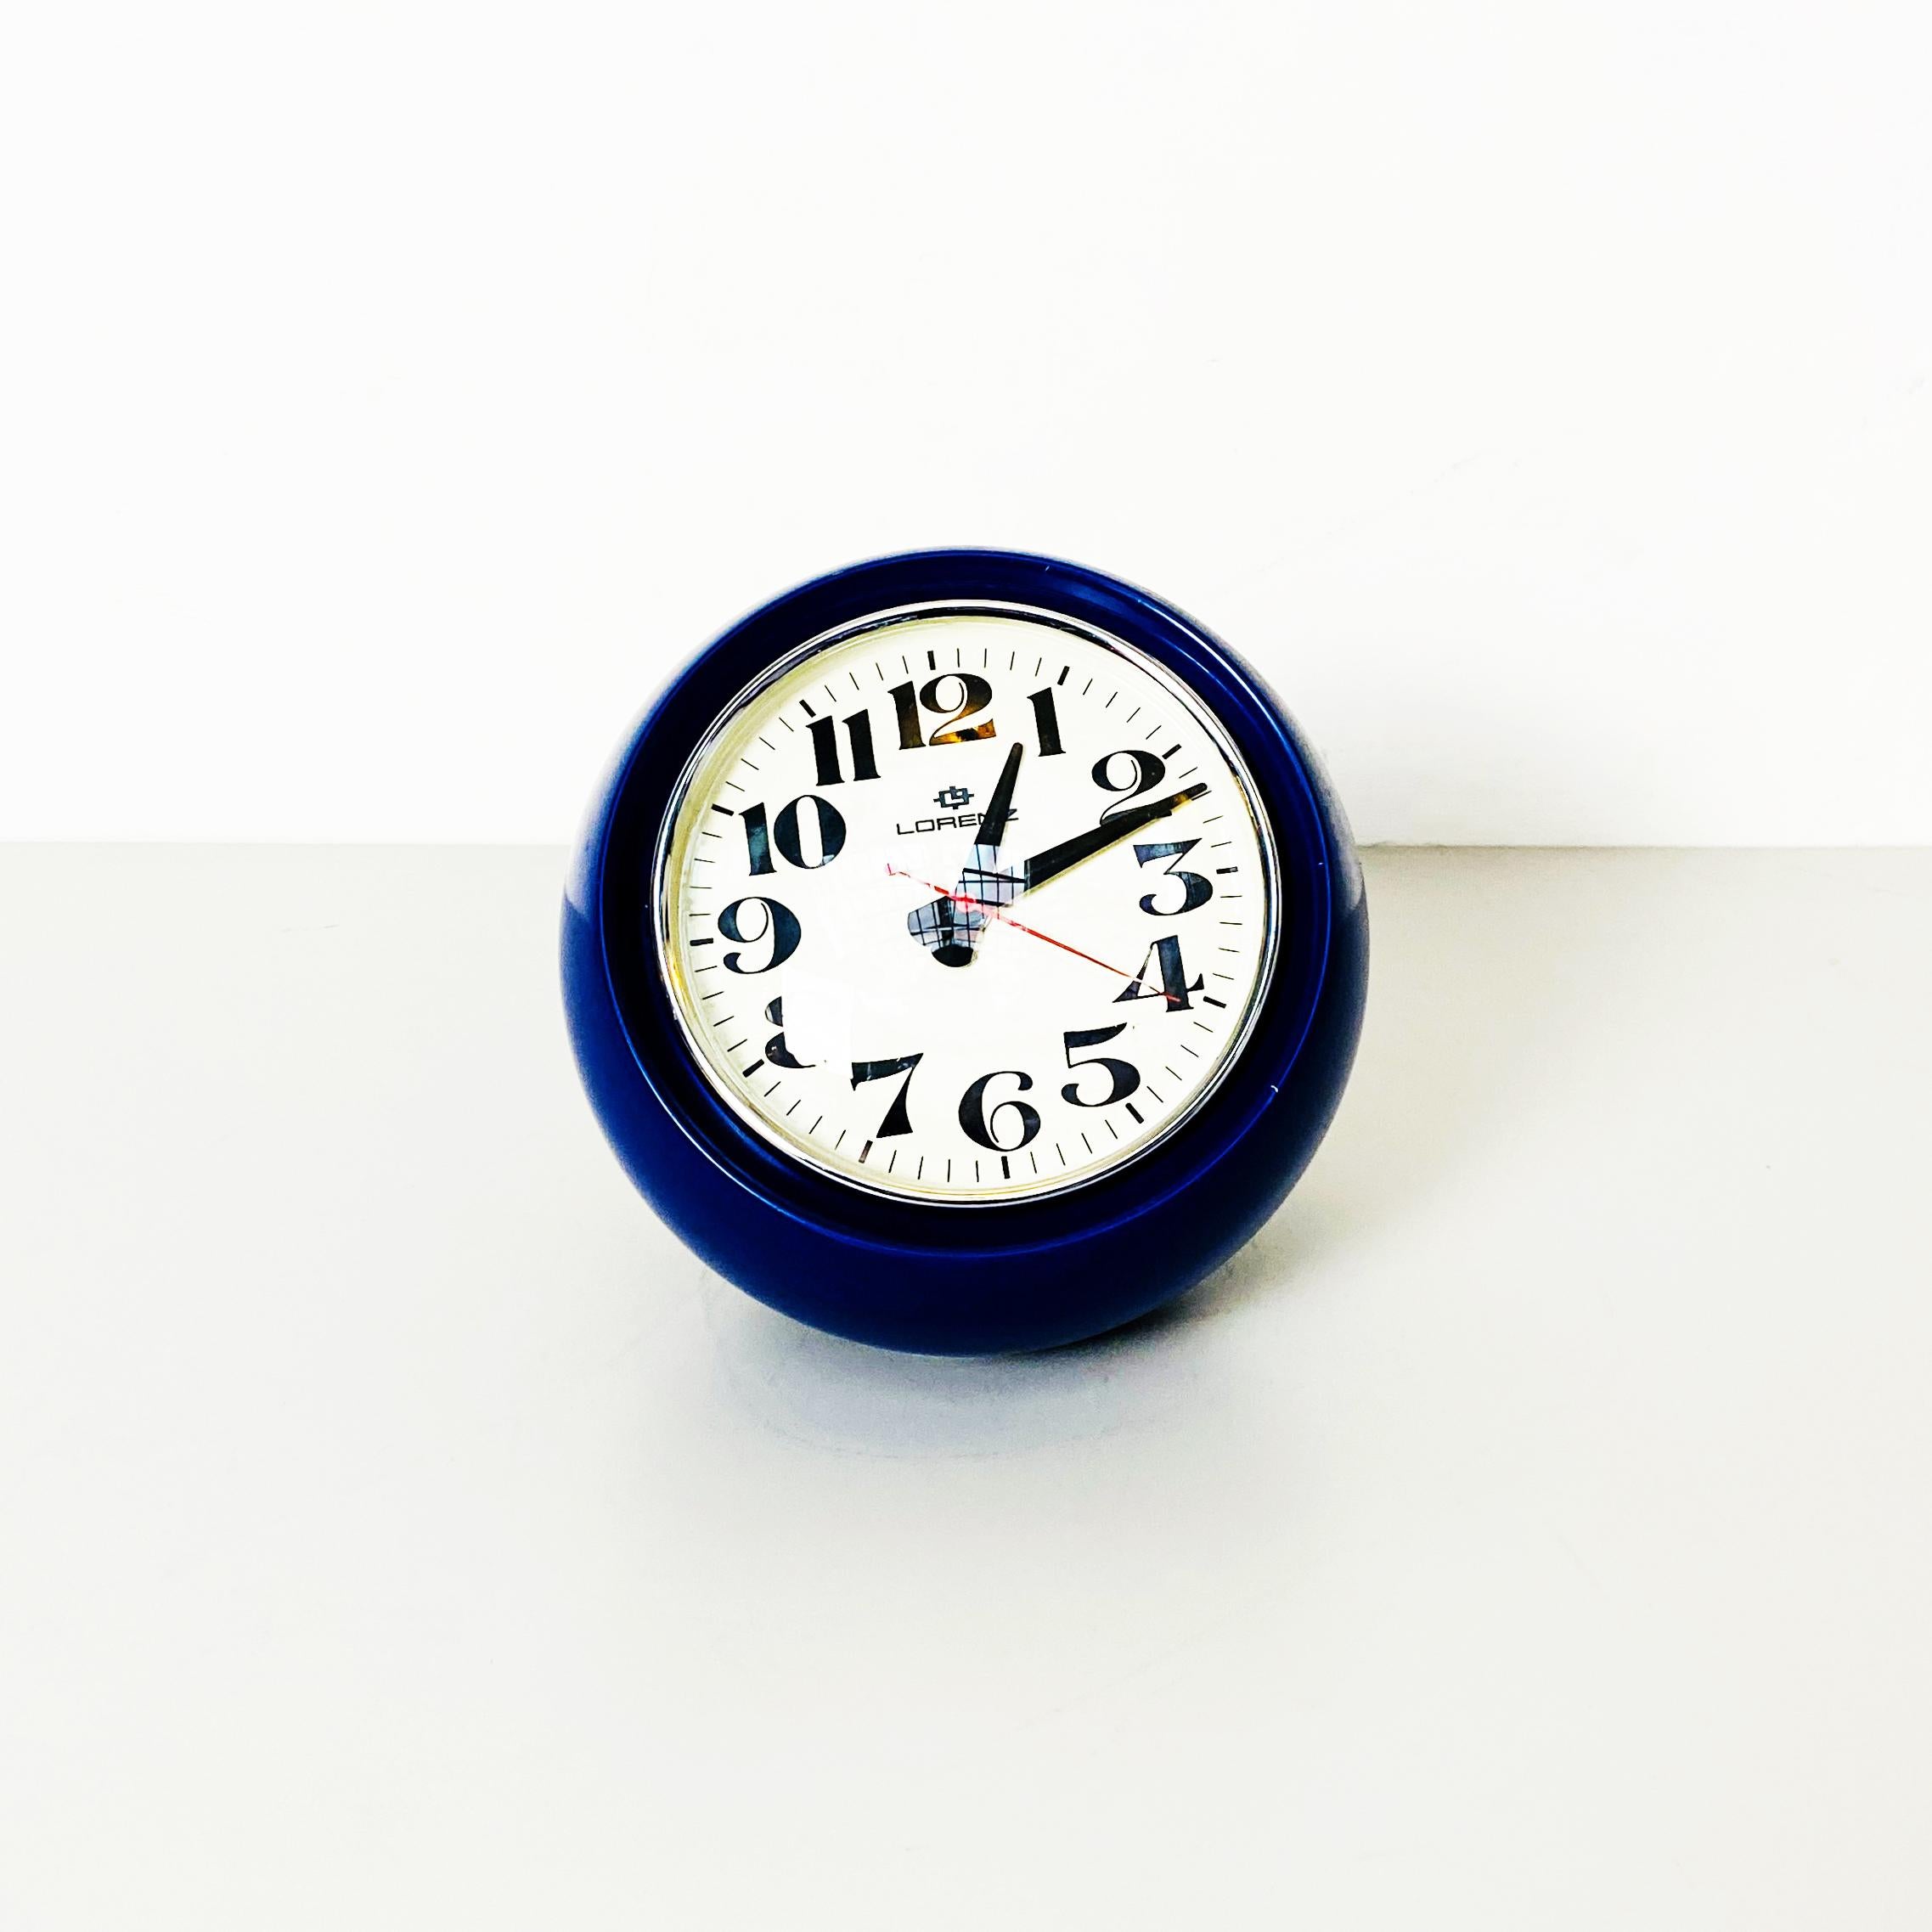 Italian mid-century Spherical plastic blue table clock model Boule by Lorenz, 1960s
Boule model table clock, the structure is in spherical shape in metal and plastic. The dial is removable and positioned at an angle to improve readability.
Made by